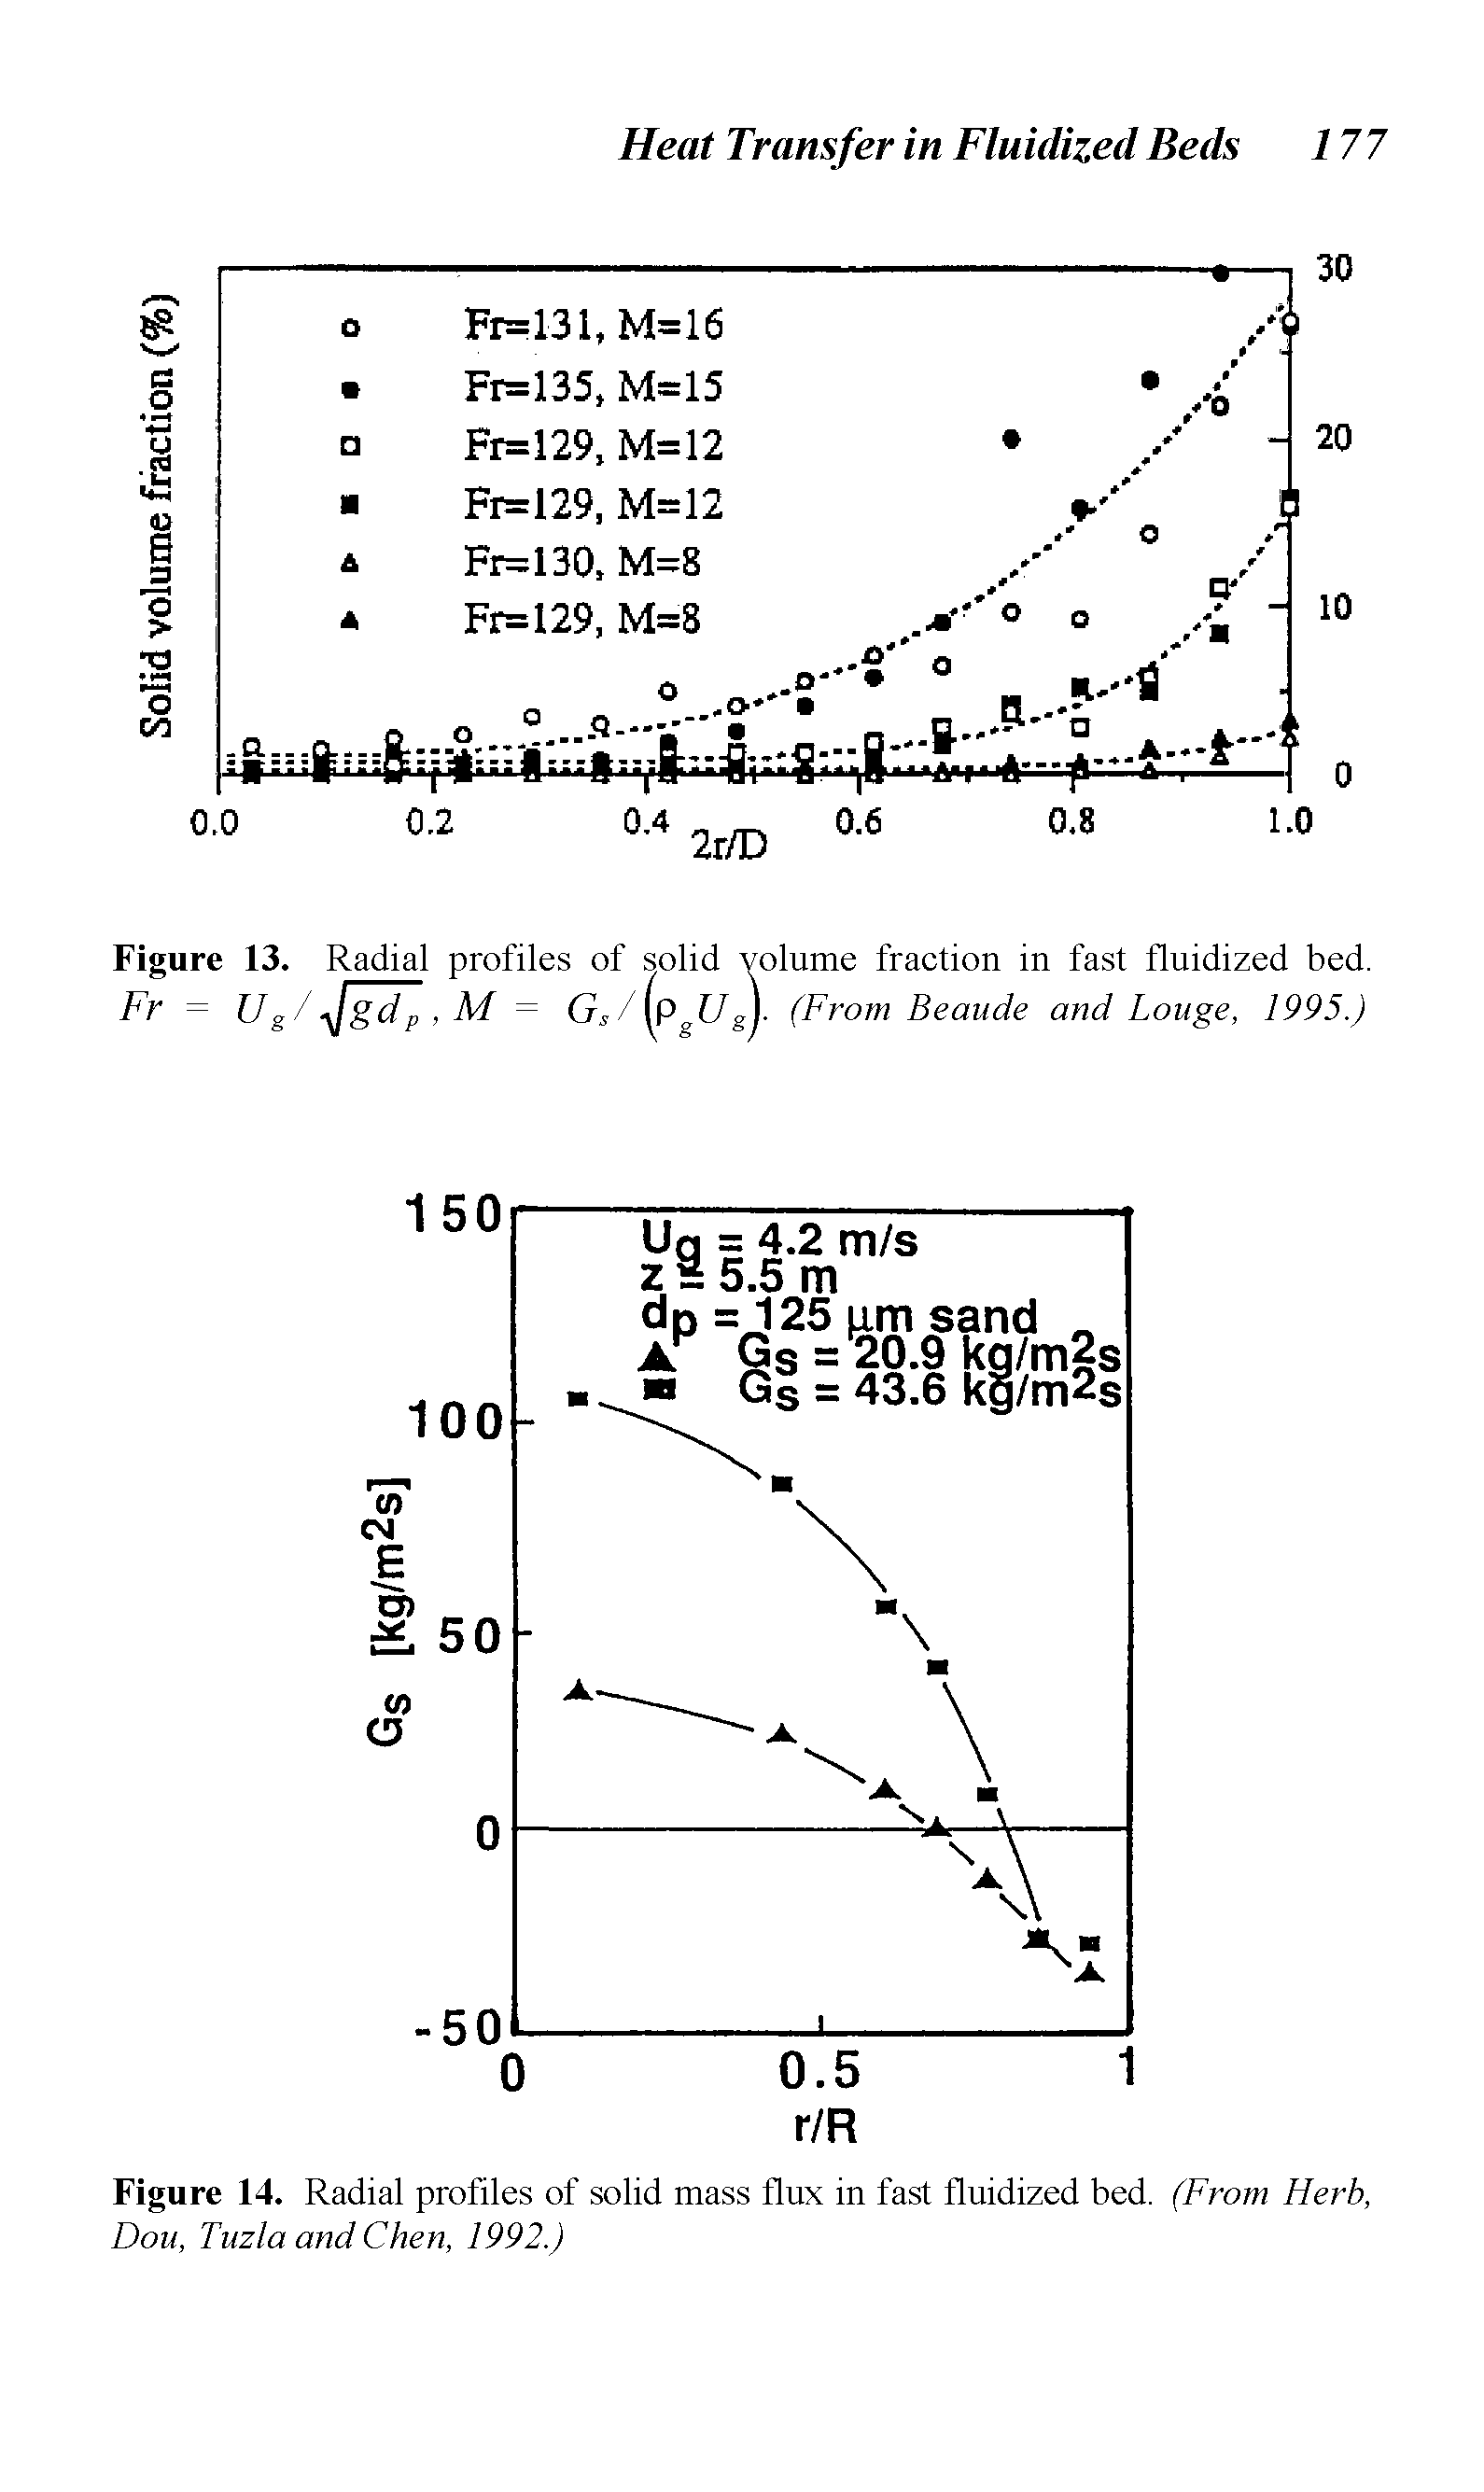 Figure 13. Radial profiles of solid volume fraction in fast fluidized bed. Fr = Us/Jgd P,M = Gs/ pgUg (Fro m Beaude and Louge, 1995.)...